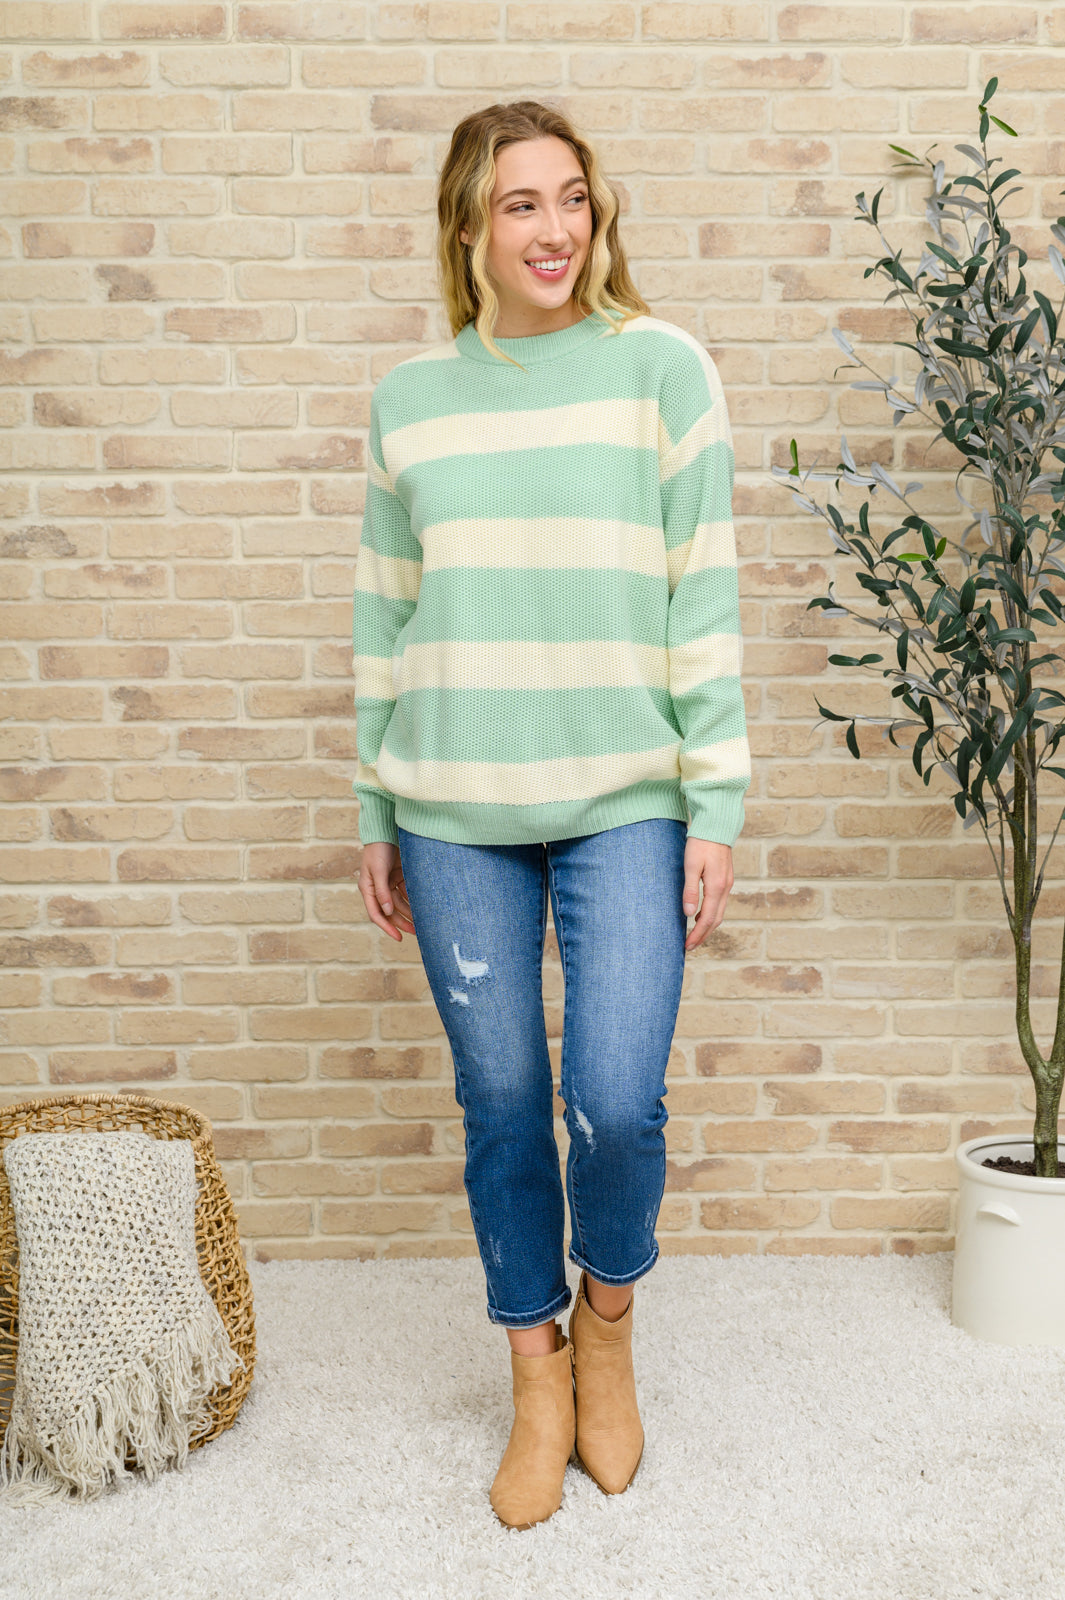 Striped Top In Sage - 11/21/2022